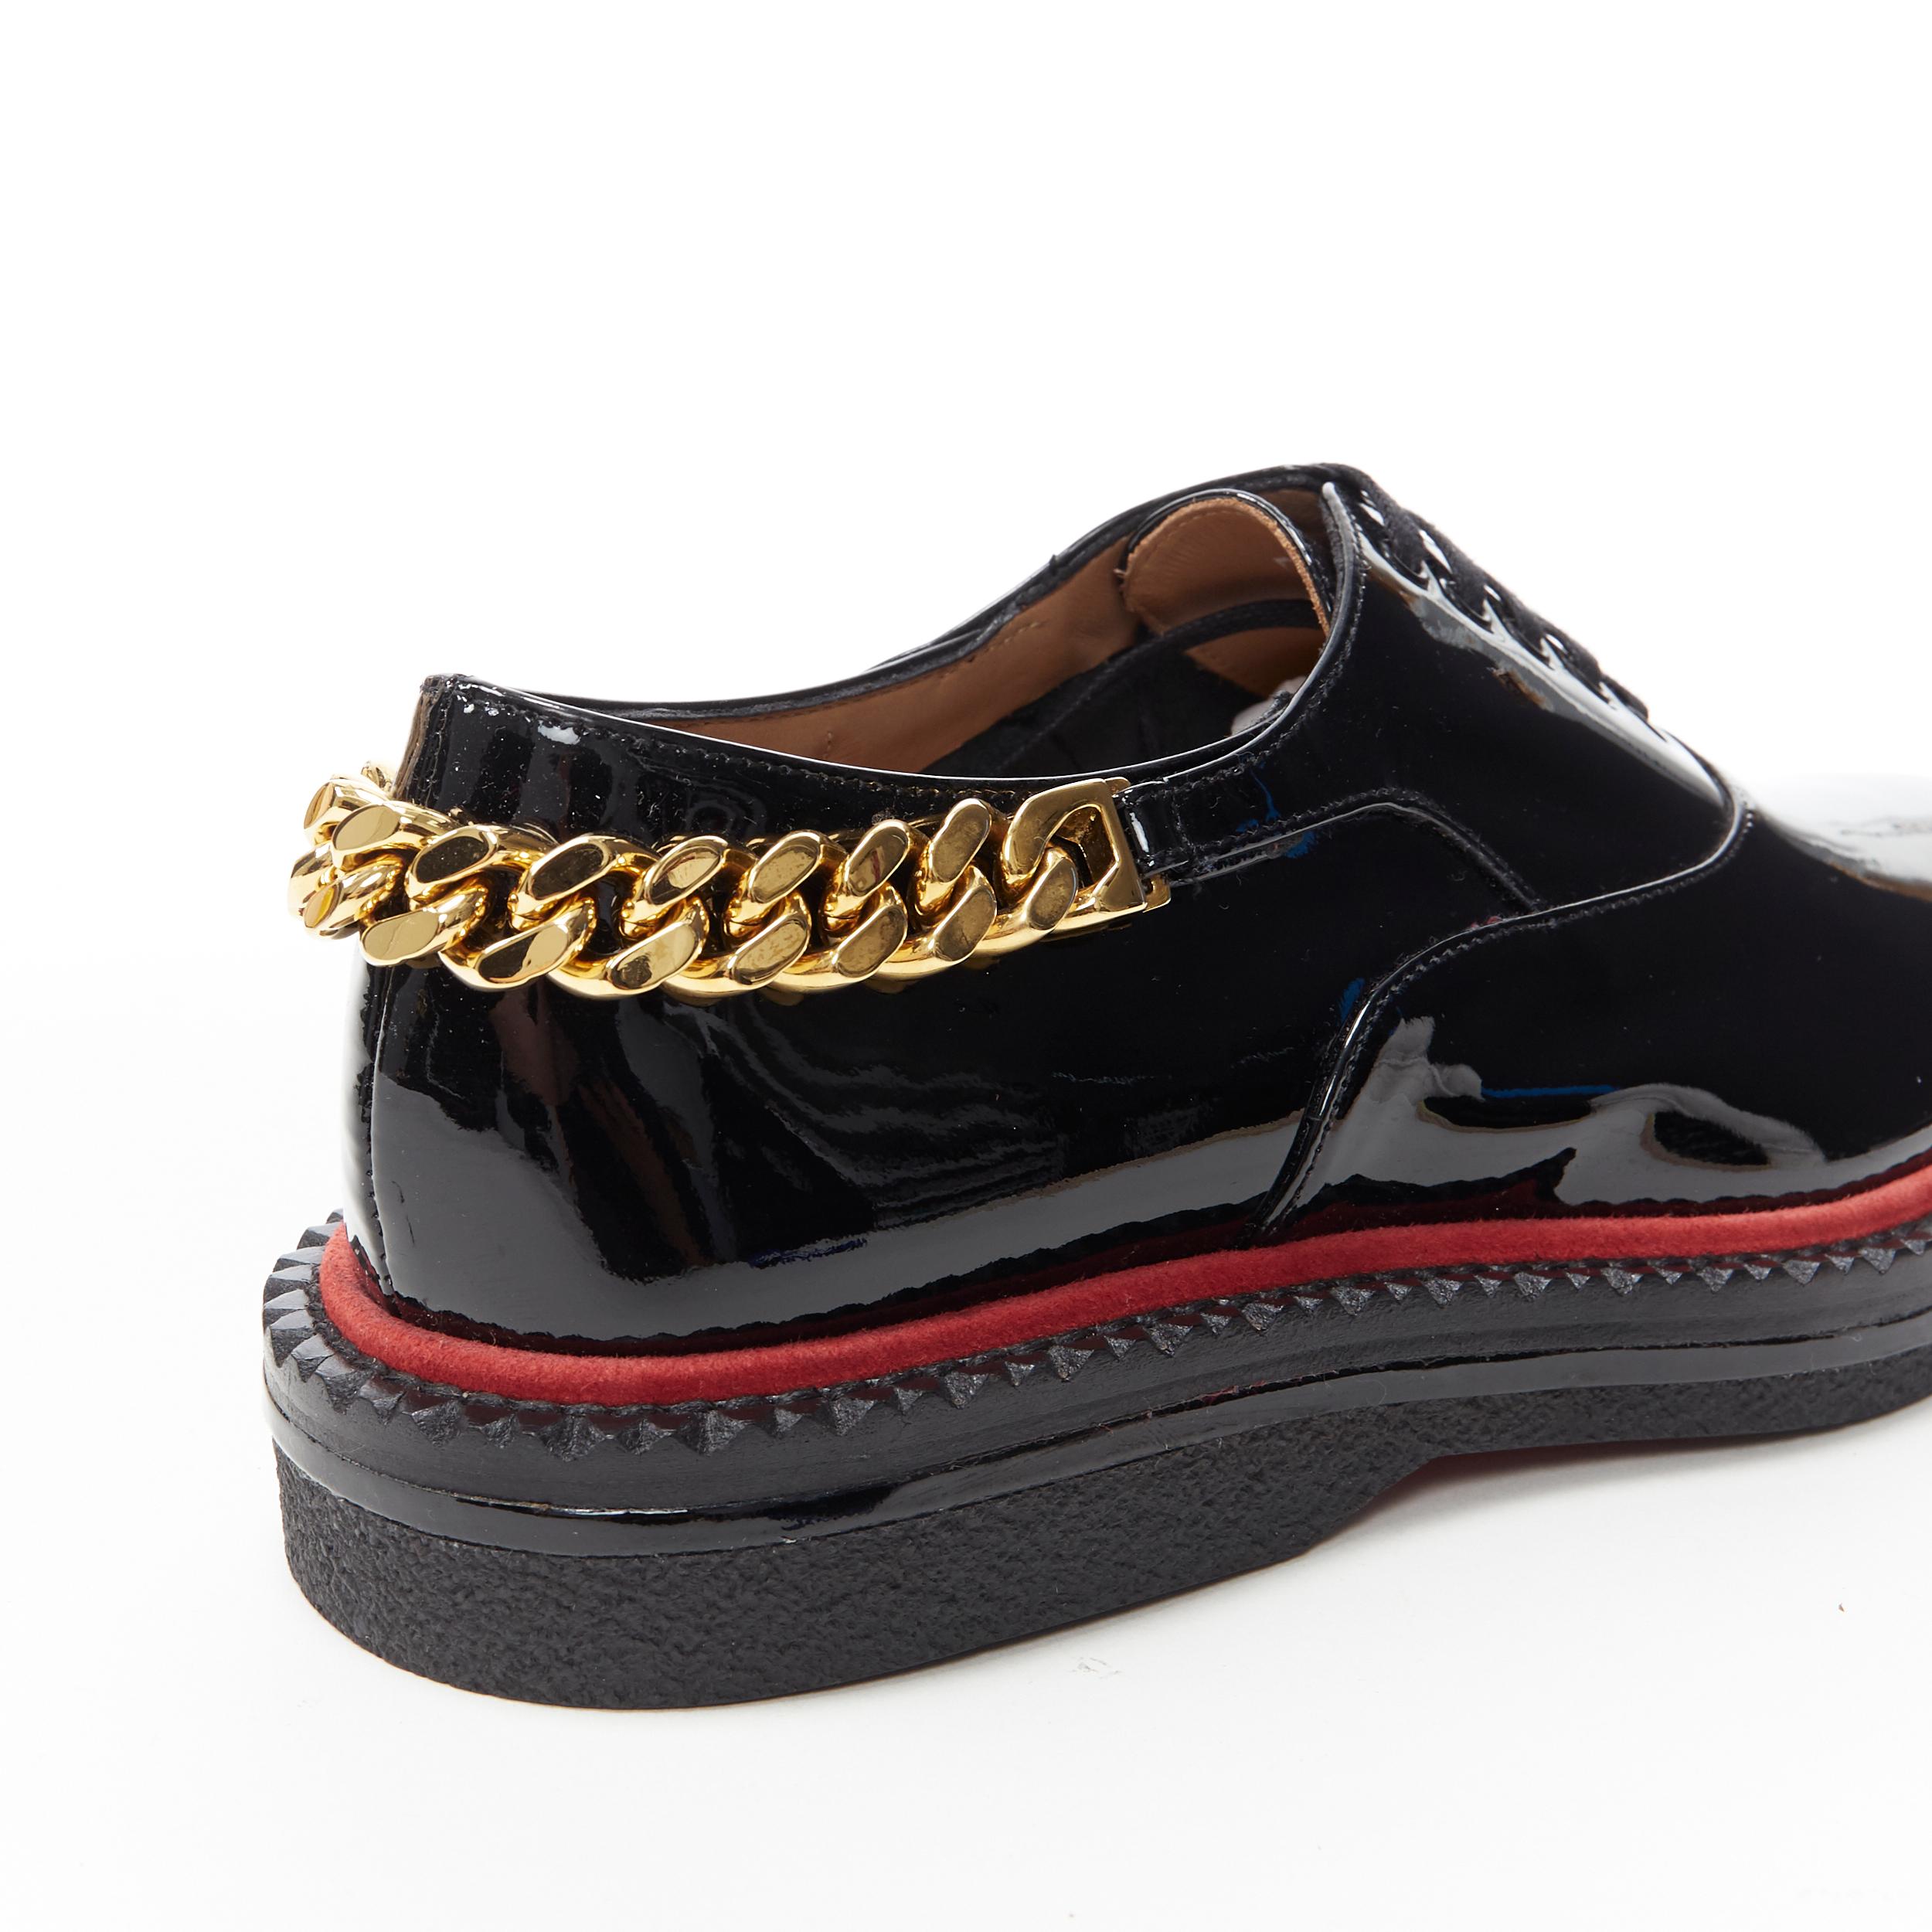 CHRISTIAN LOUBOUTIN Roy Flat black patent gold chunky chain XL sole brogue EU41
Brand: Christian Louboutin
Designer: Christian Louboutin
Model Name / Style: Brogue
Material: Patent leather
Color: Black
Pattern: Solid
Closure: Lace up
Extra Detail: